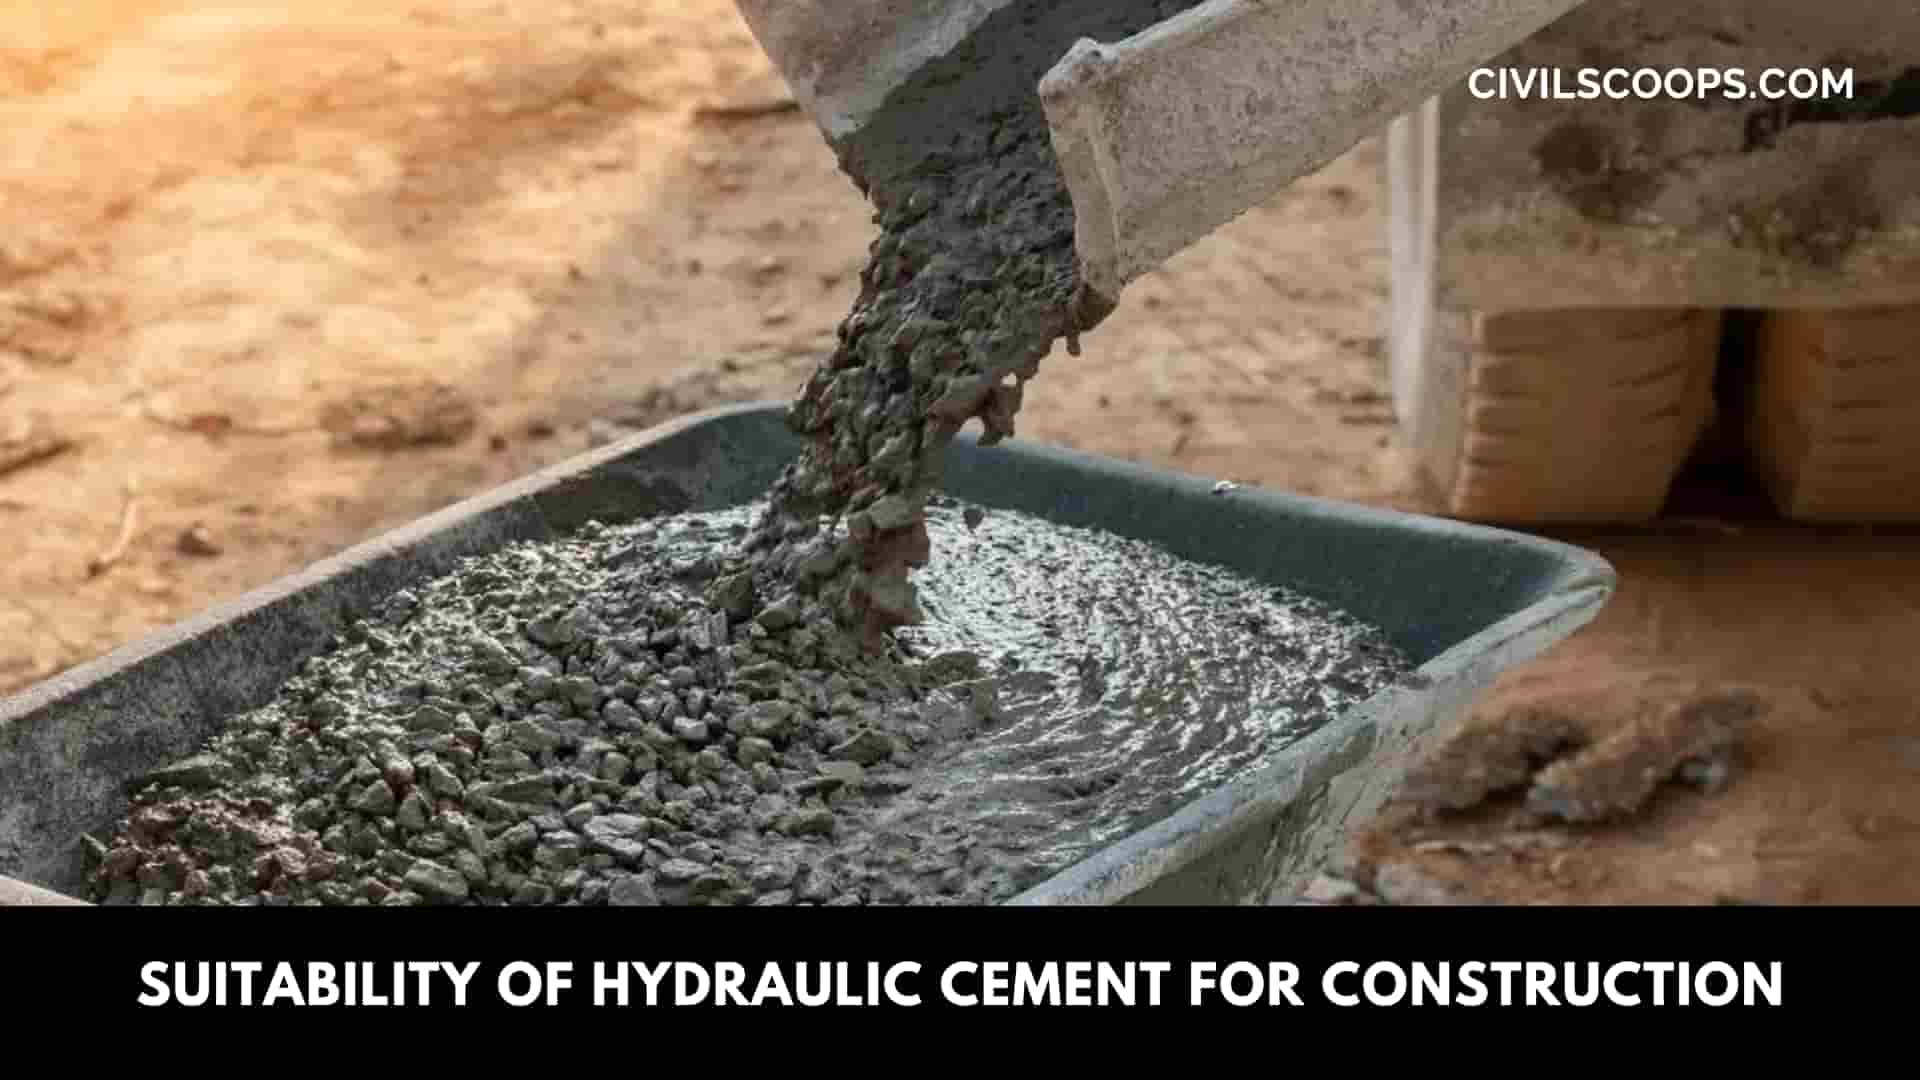 Suitability of Hydraulic Cement for Construction